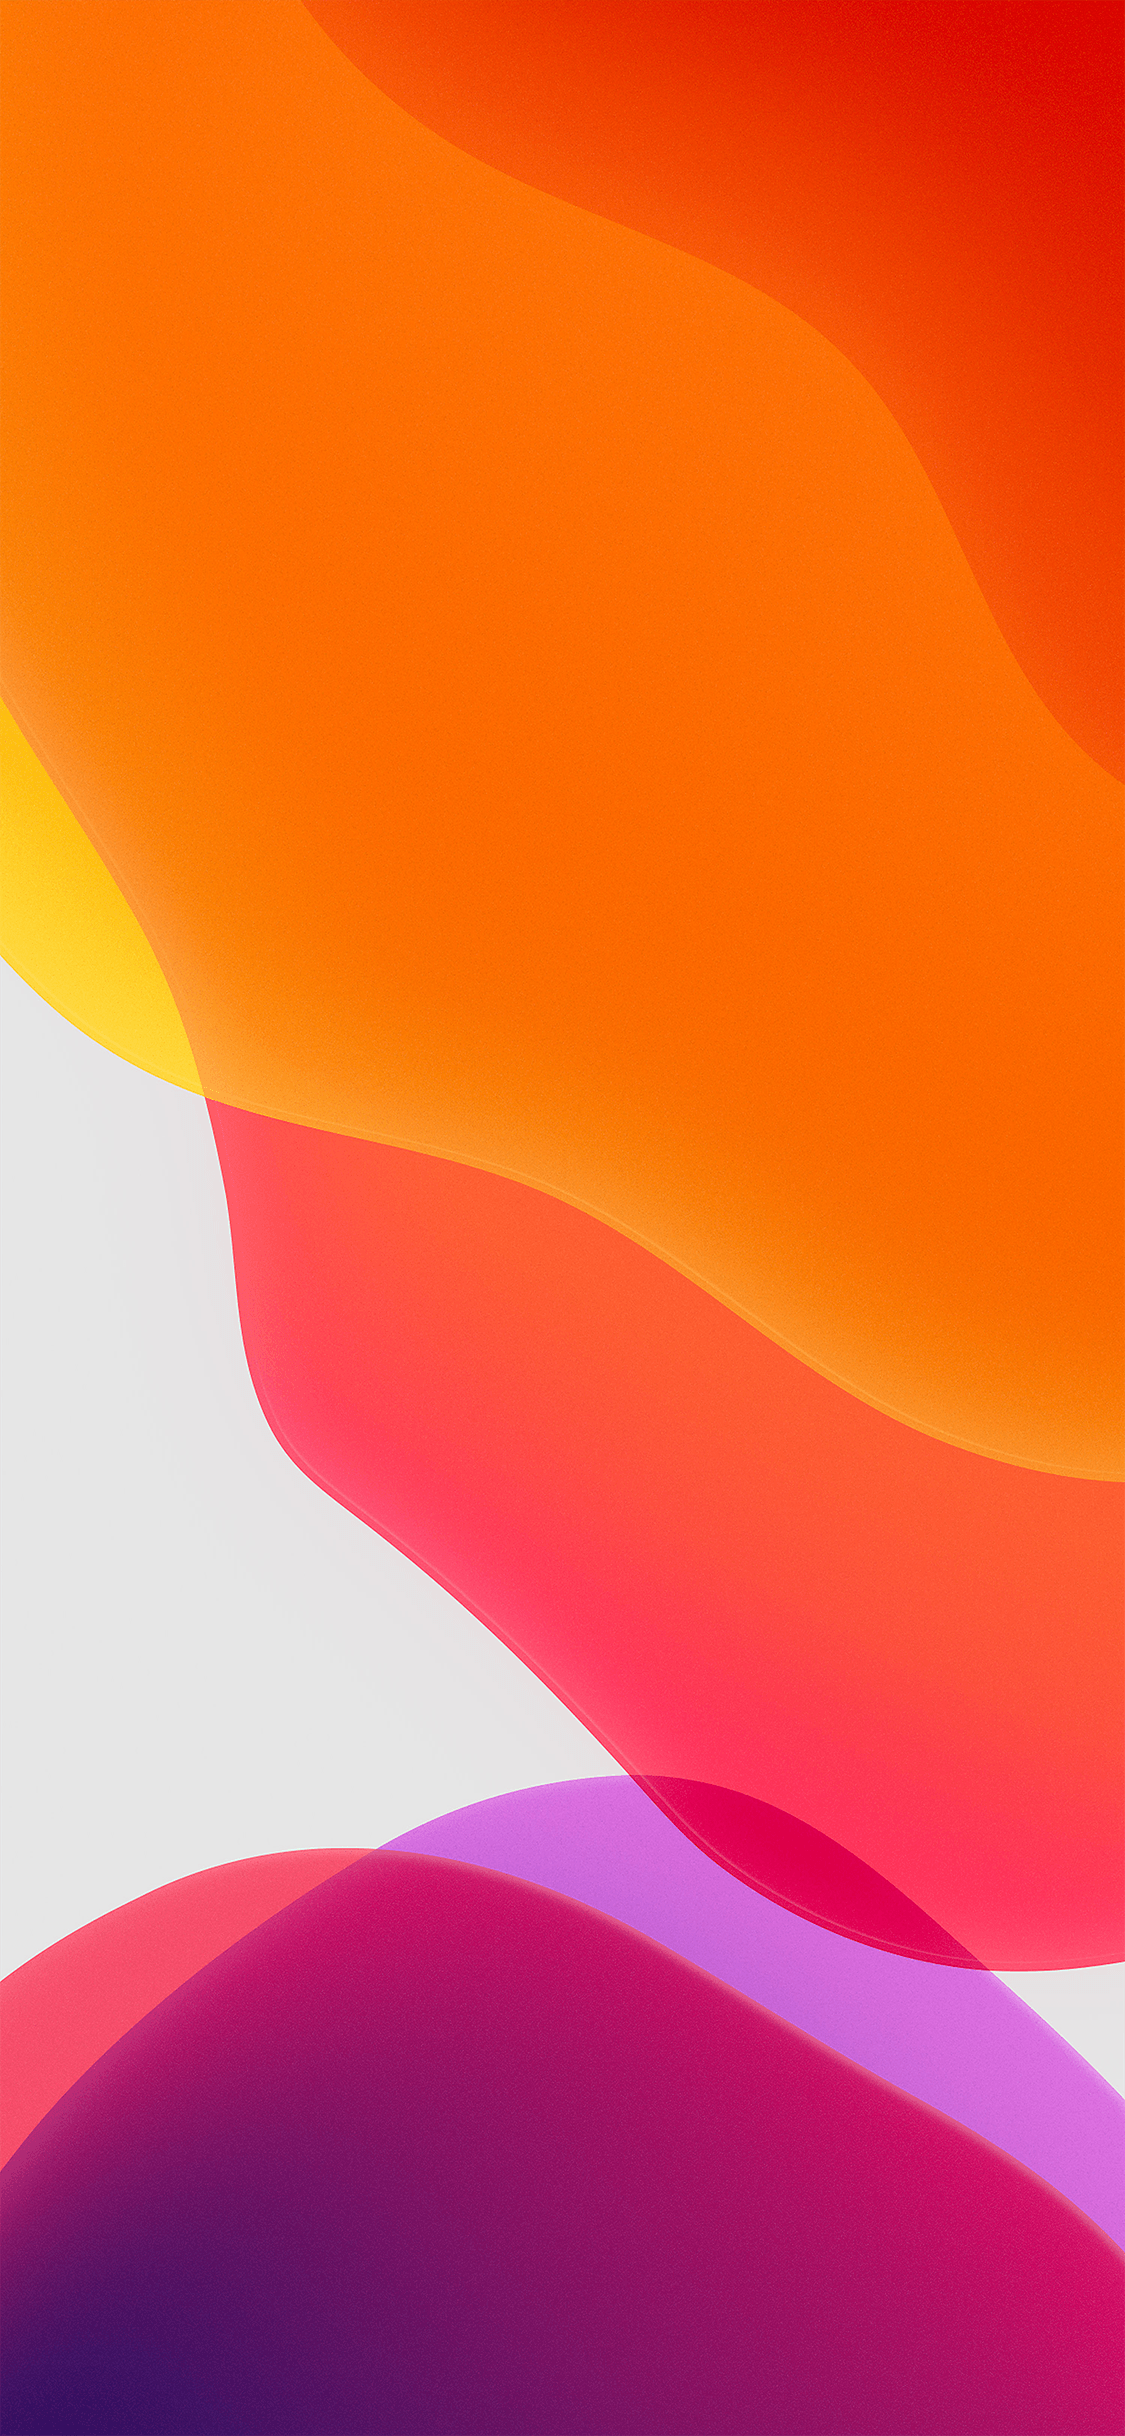 iOS 13 Official Wallpapers - Wallpaper Cave